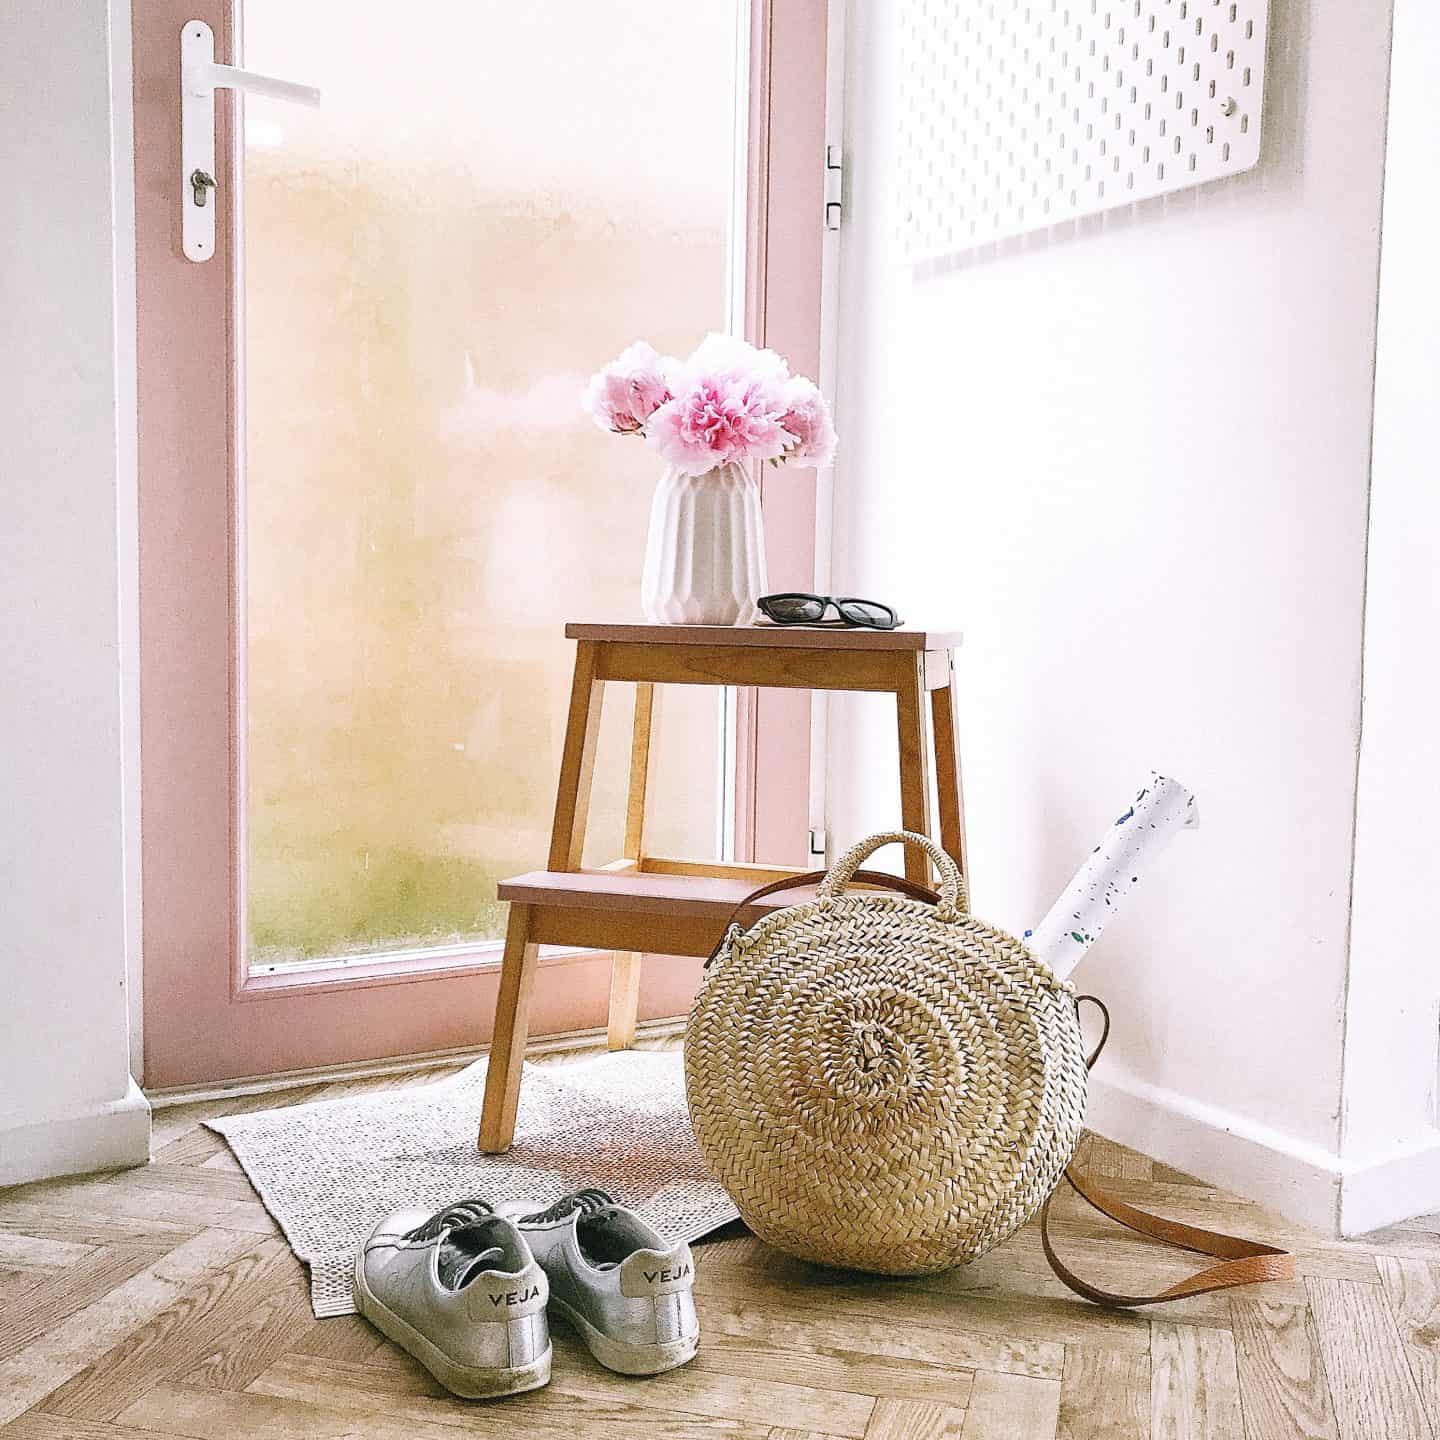 Glass uPVC door painted in Frenchic Dusky Blush Al Fresco paint with a wooden stool, trainers and bag in front. 